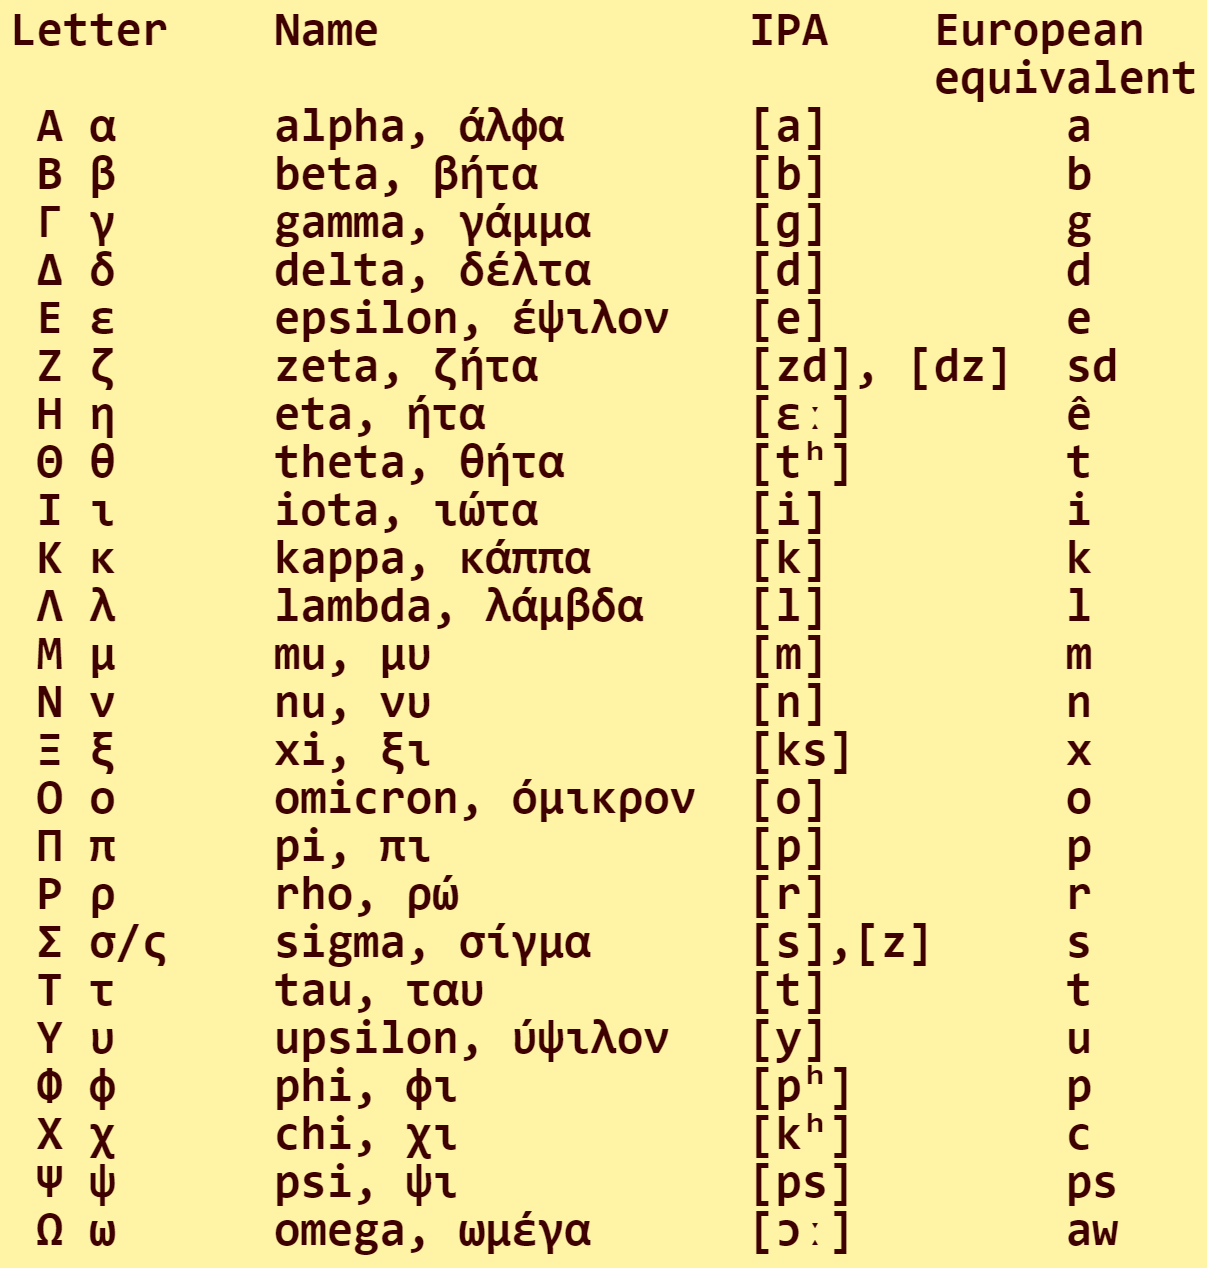 In this example, we create a table of all characters of the Greek alphabet. To maintain spacing between letters, we use a monospace font. For better readability, we've also made it bold.